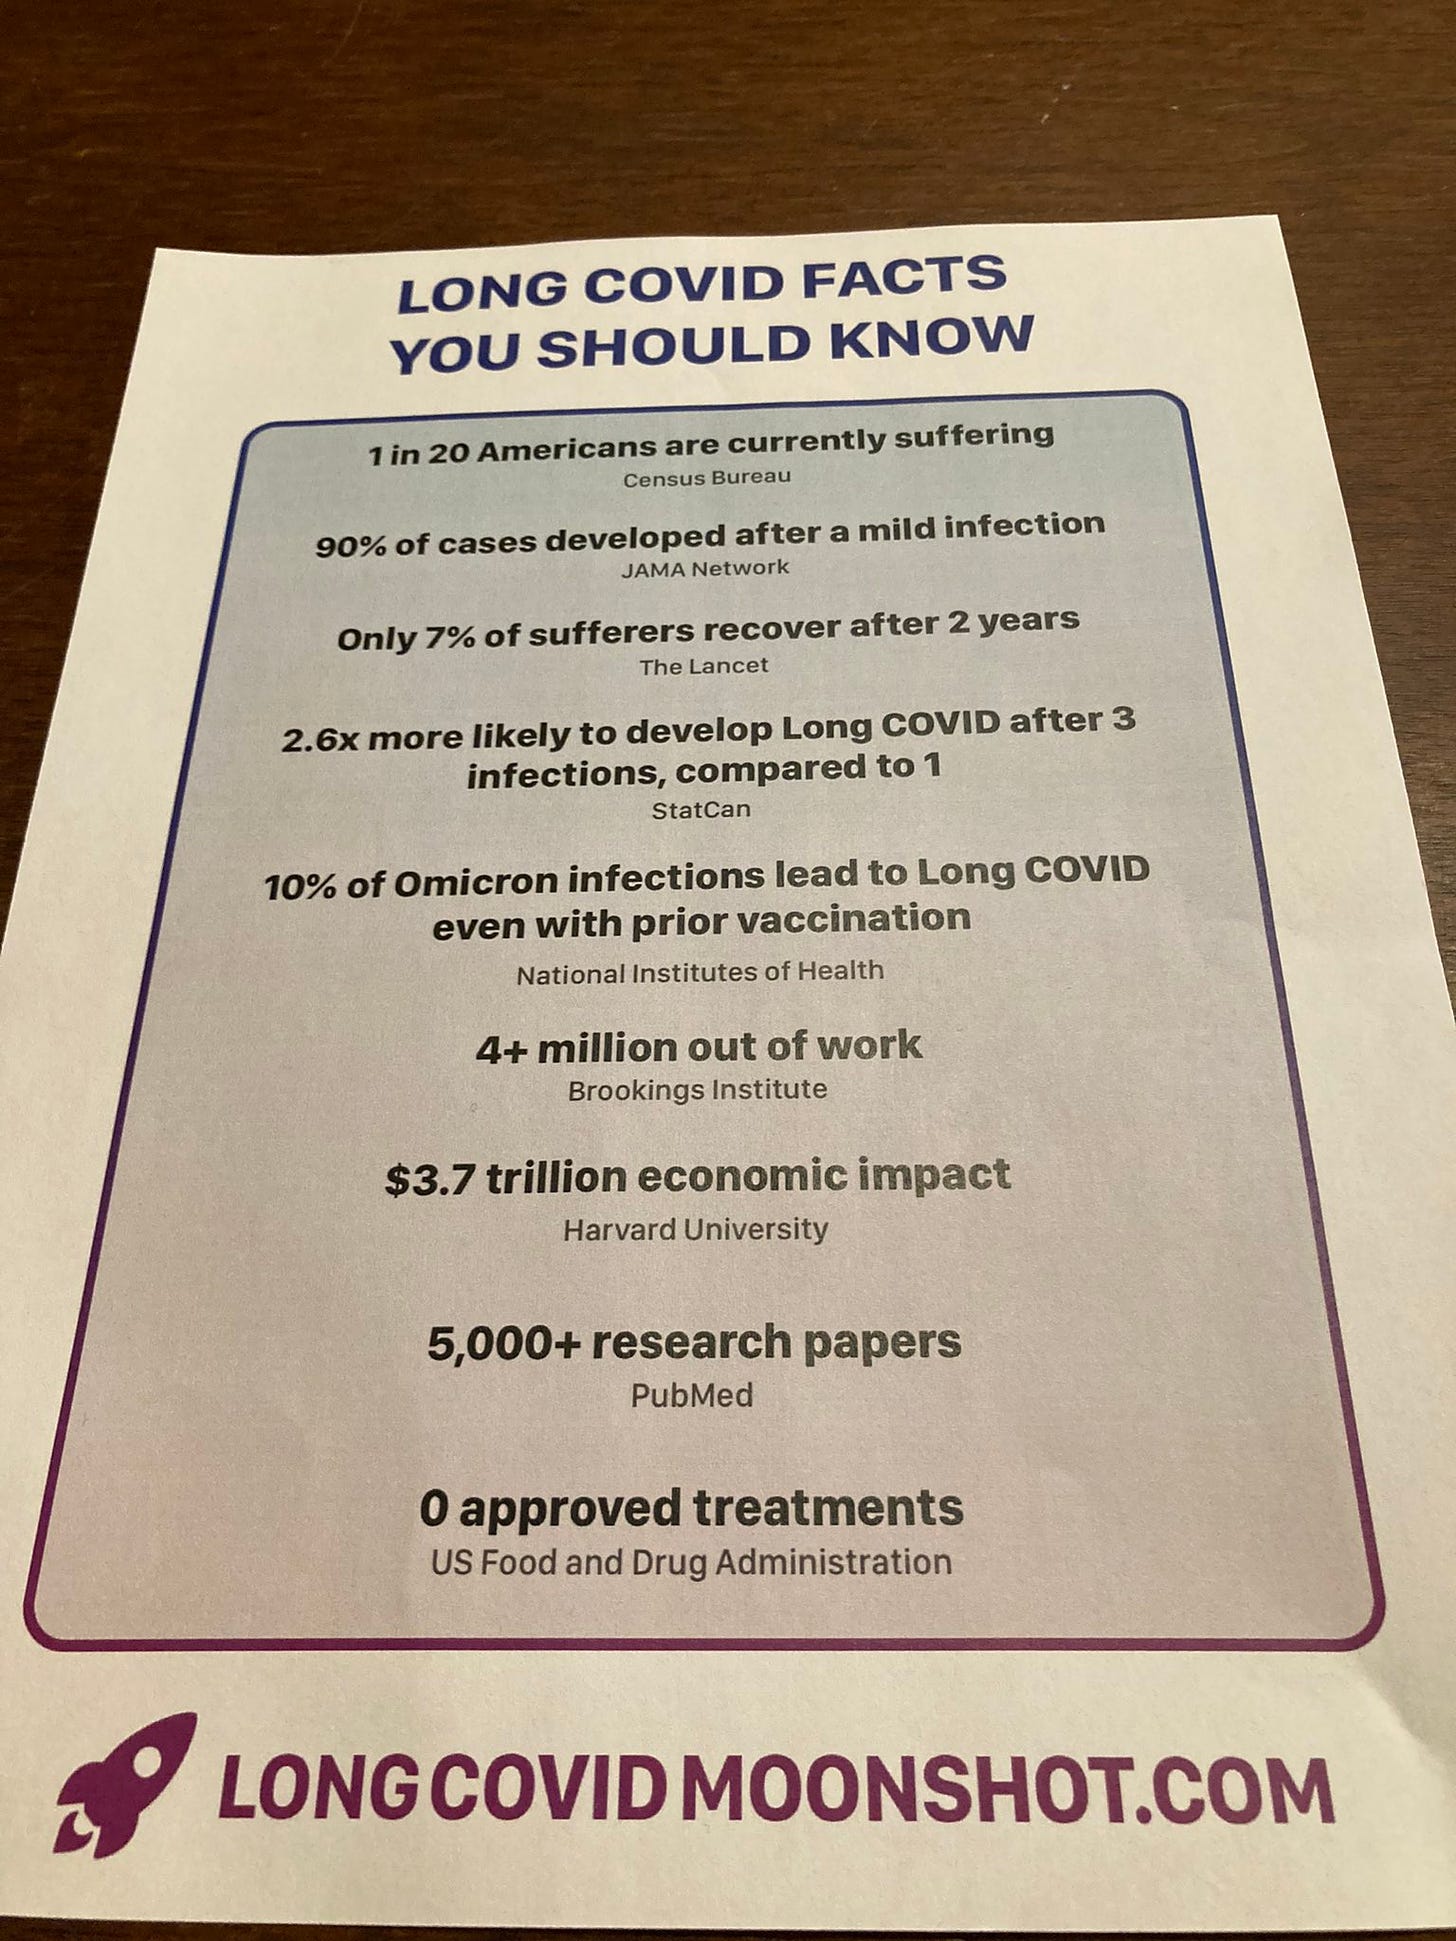 Photo of leaflet: text includes "LONG COVID FACTS YOU SHOULD KNOW-  1 in 20 Americans are currently suffering (Census Bureau)- Only 7% of sufferers recover after 2 years (The Lancet) - 10% of Omicron infections leads to Long COVID even with prior infection (National Institute of Health) - 0 approved treatments"